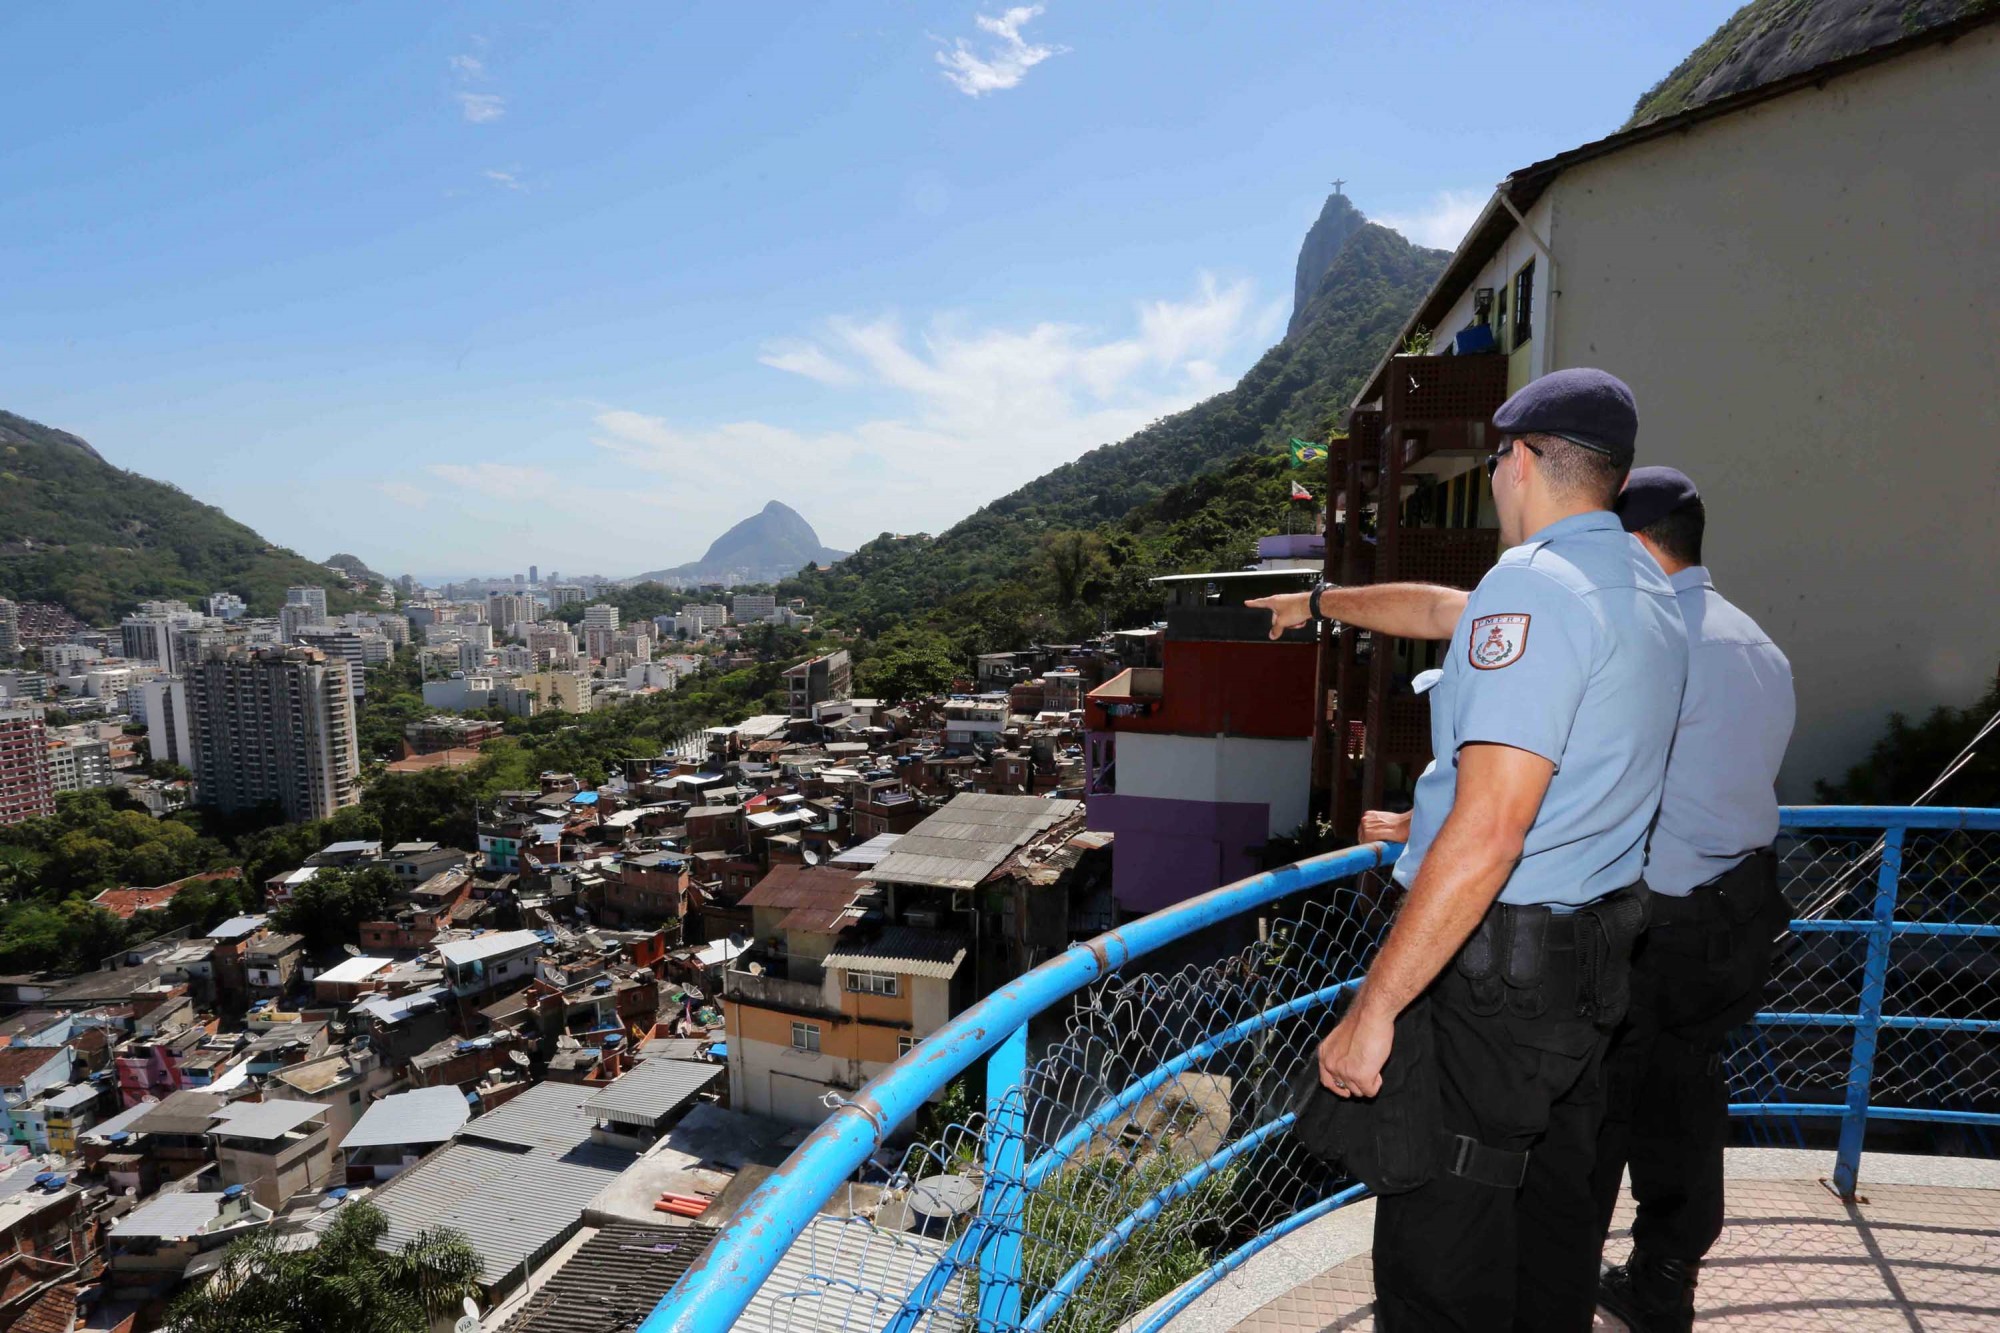 Crime Numbers Drop in Rio Communities With UPPs